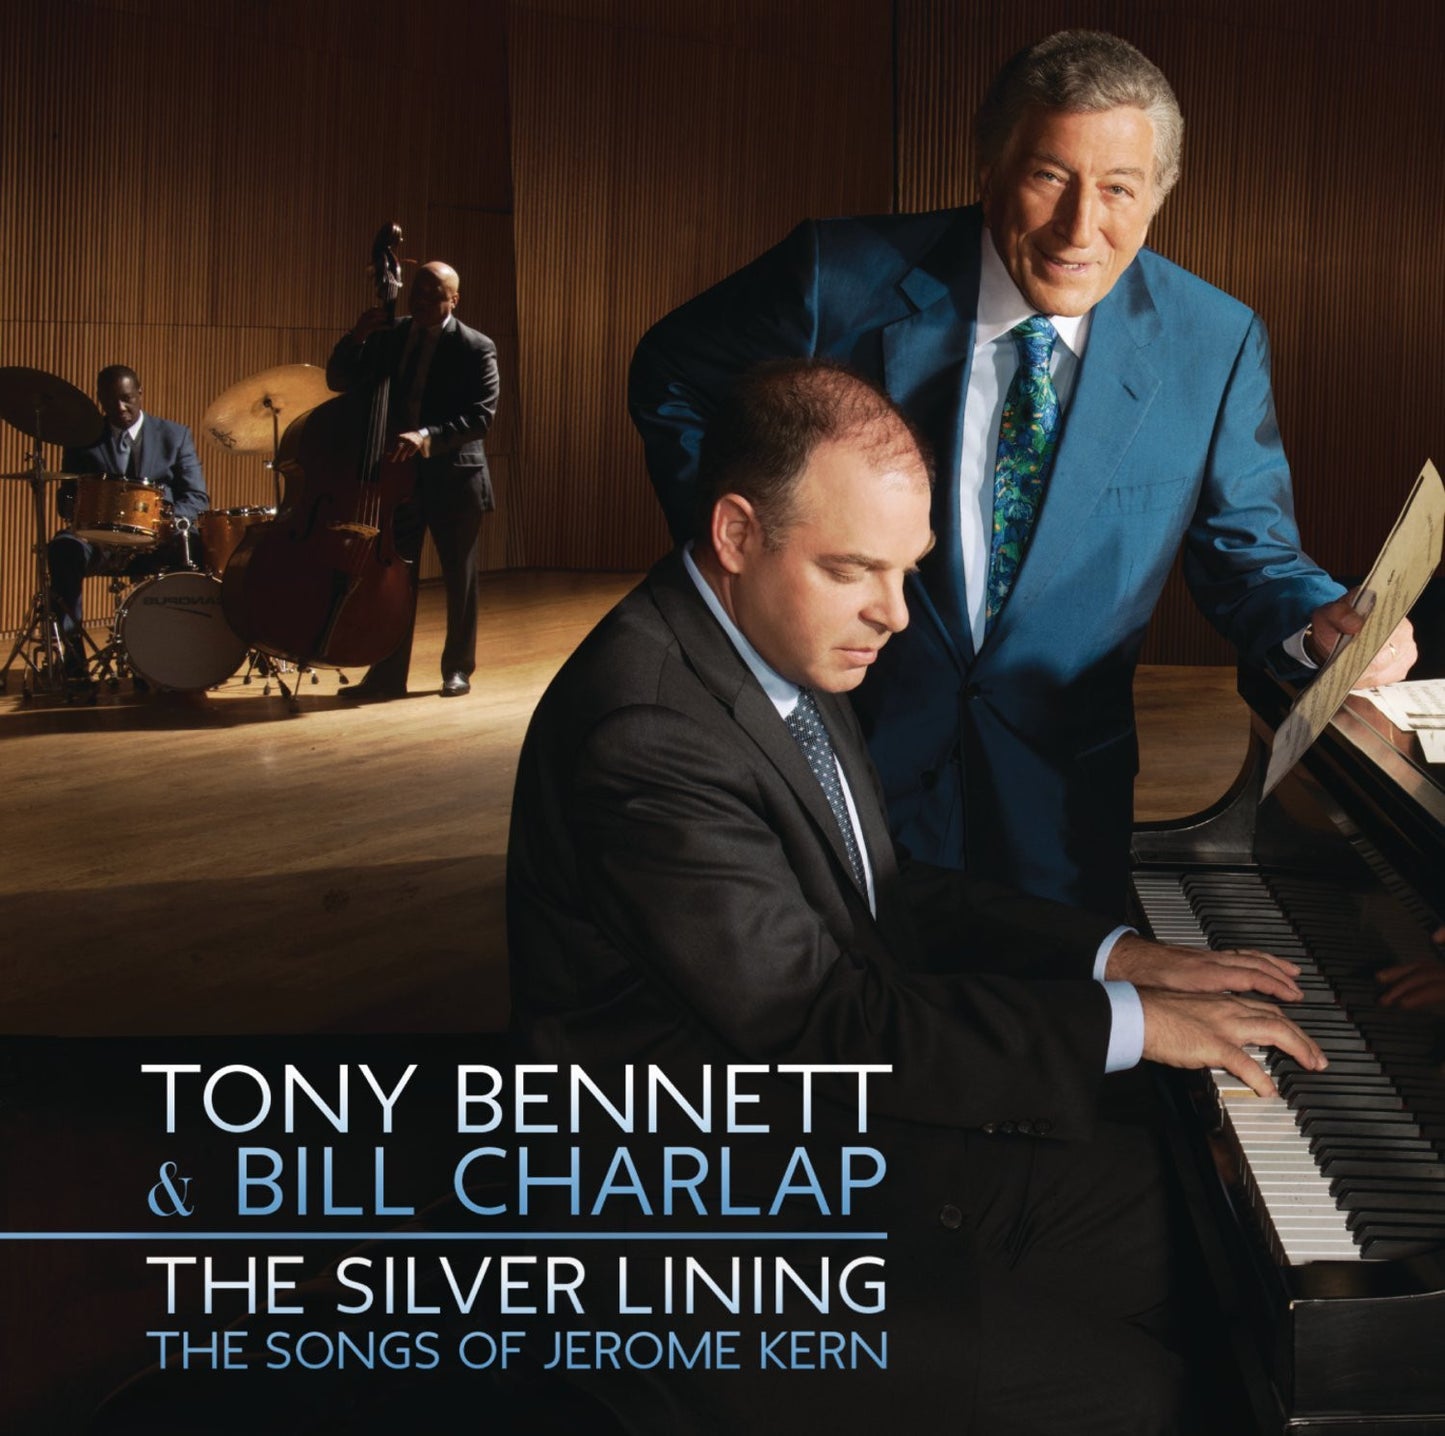 Bennett, Tony & Bill Charlap - The Silver Lining - The Songs of Jerome Kern